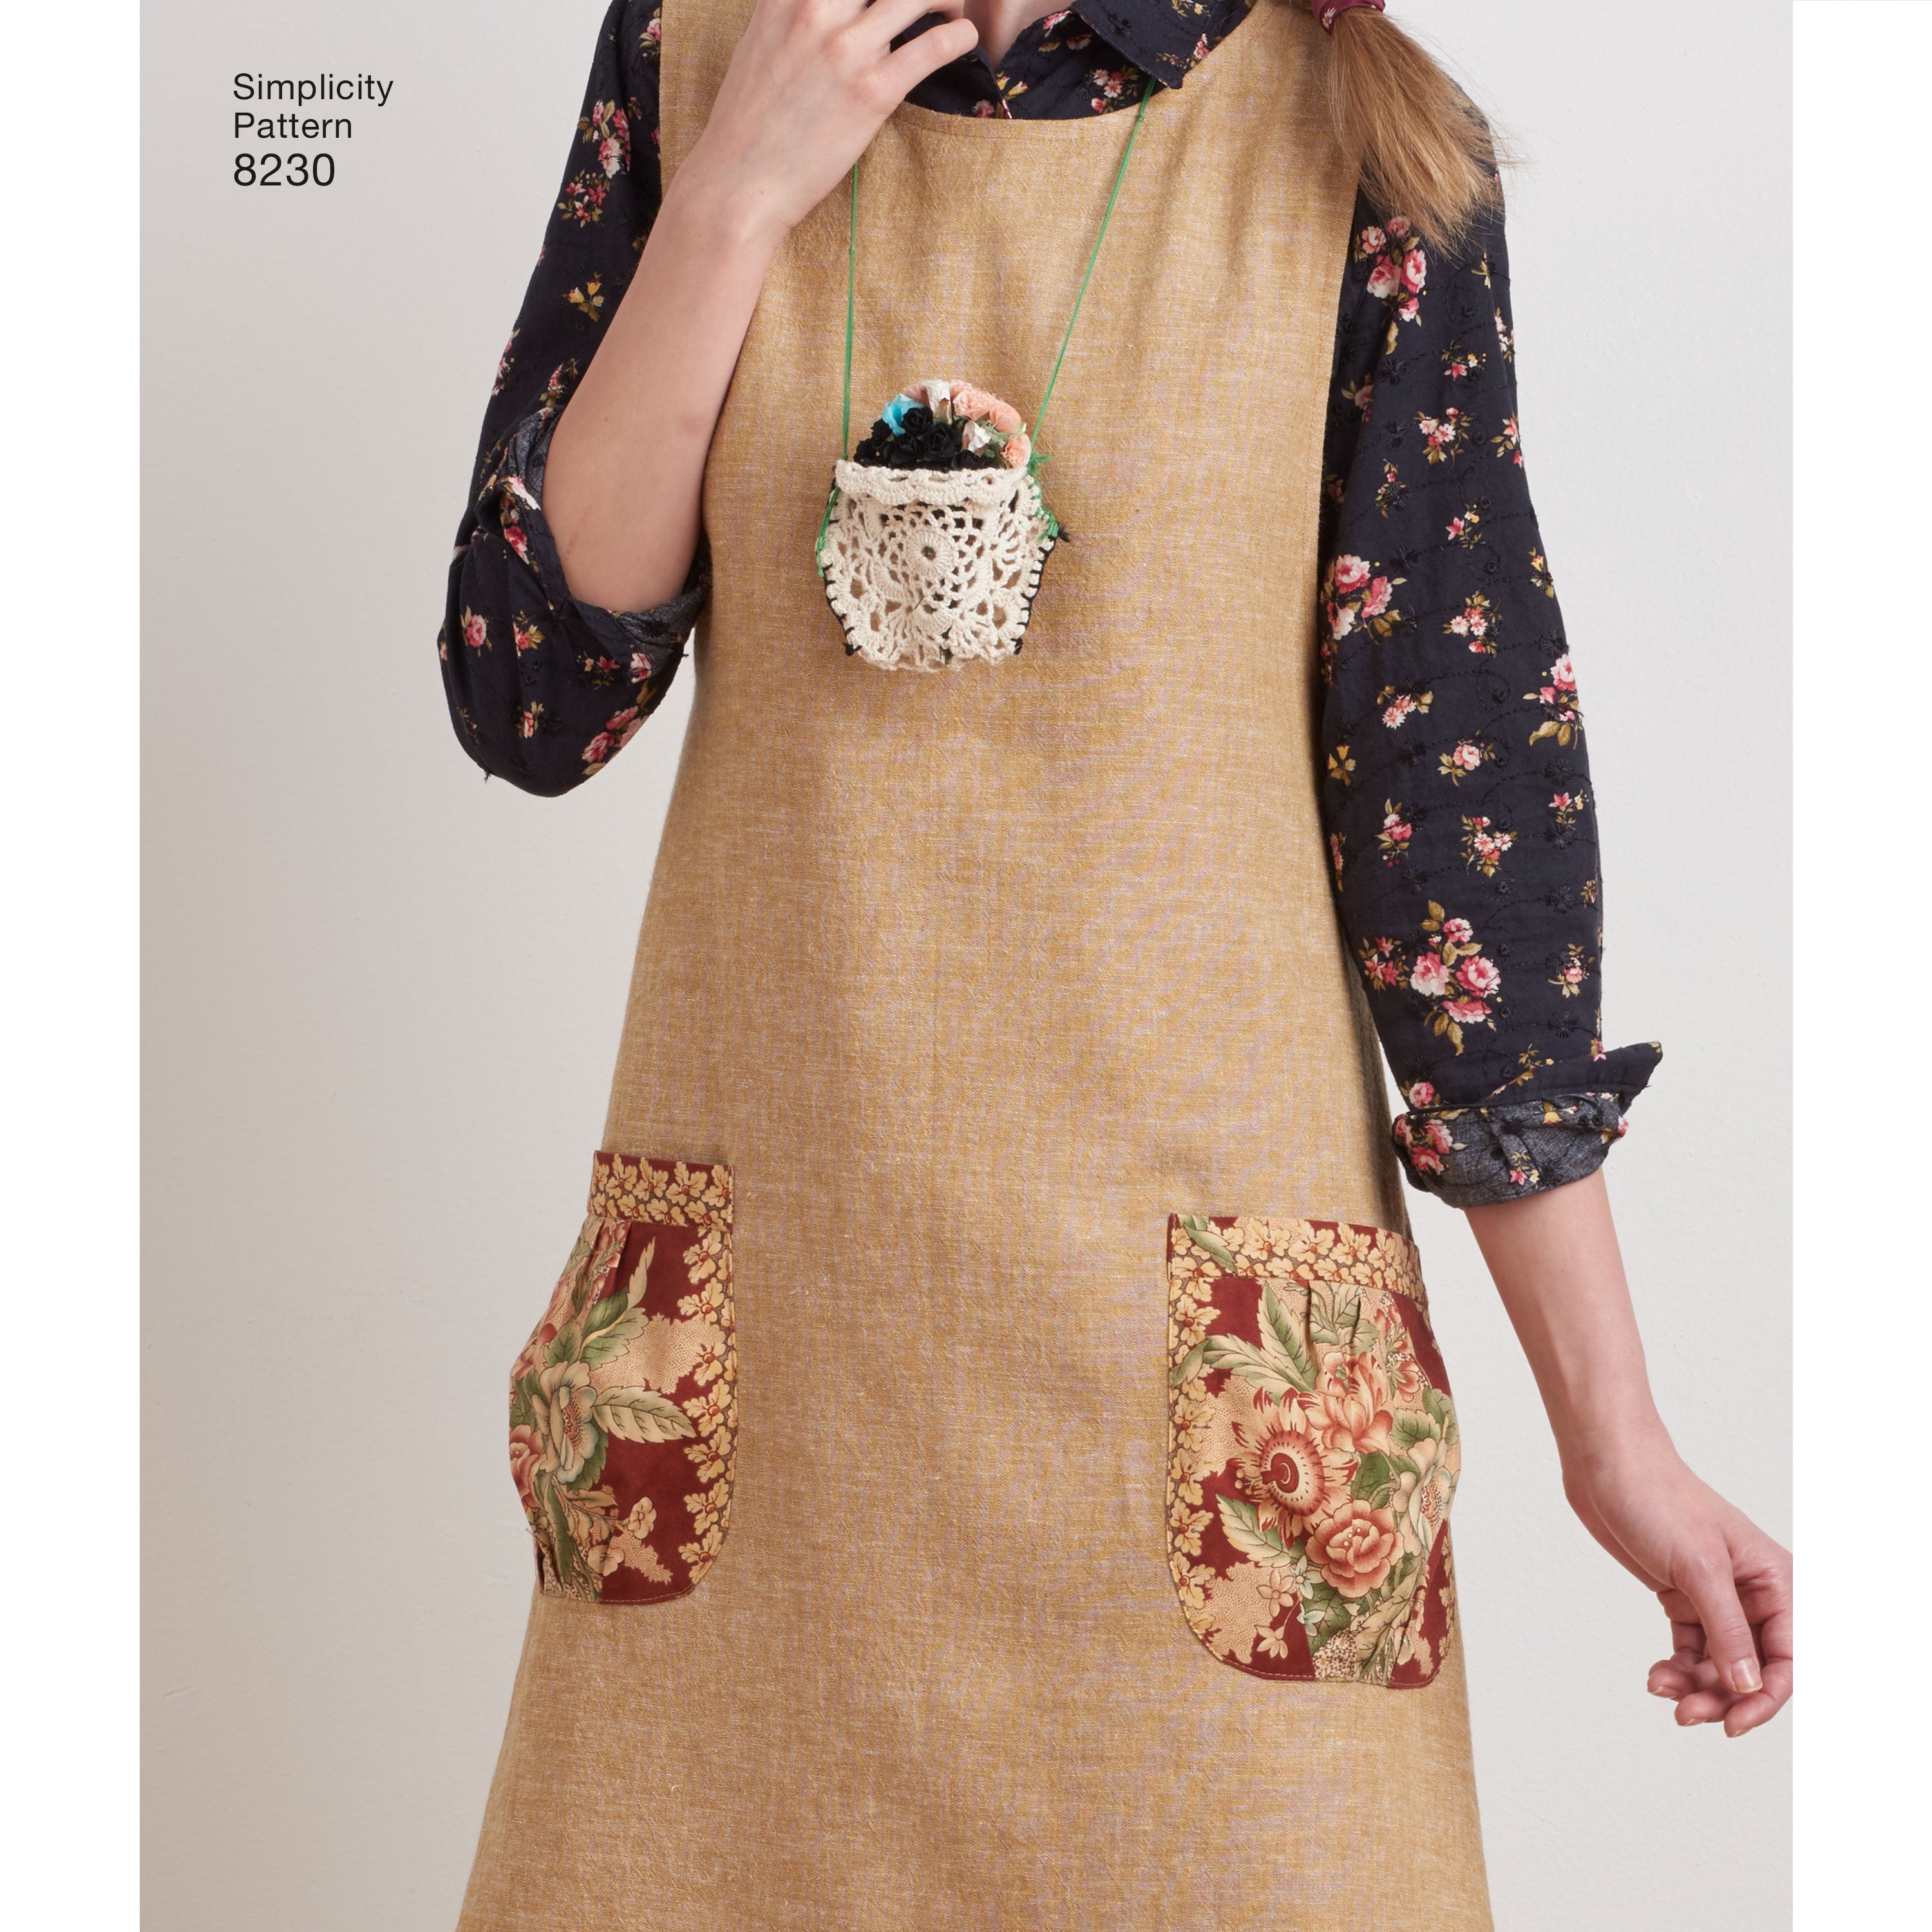 Simplicity Apron Dress and Tabard S8230